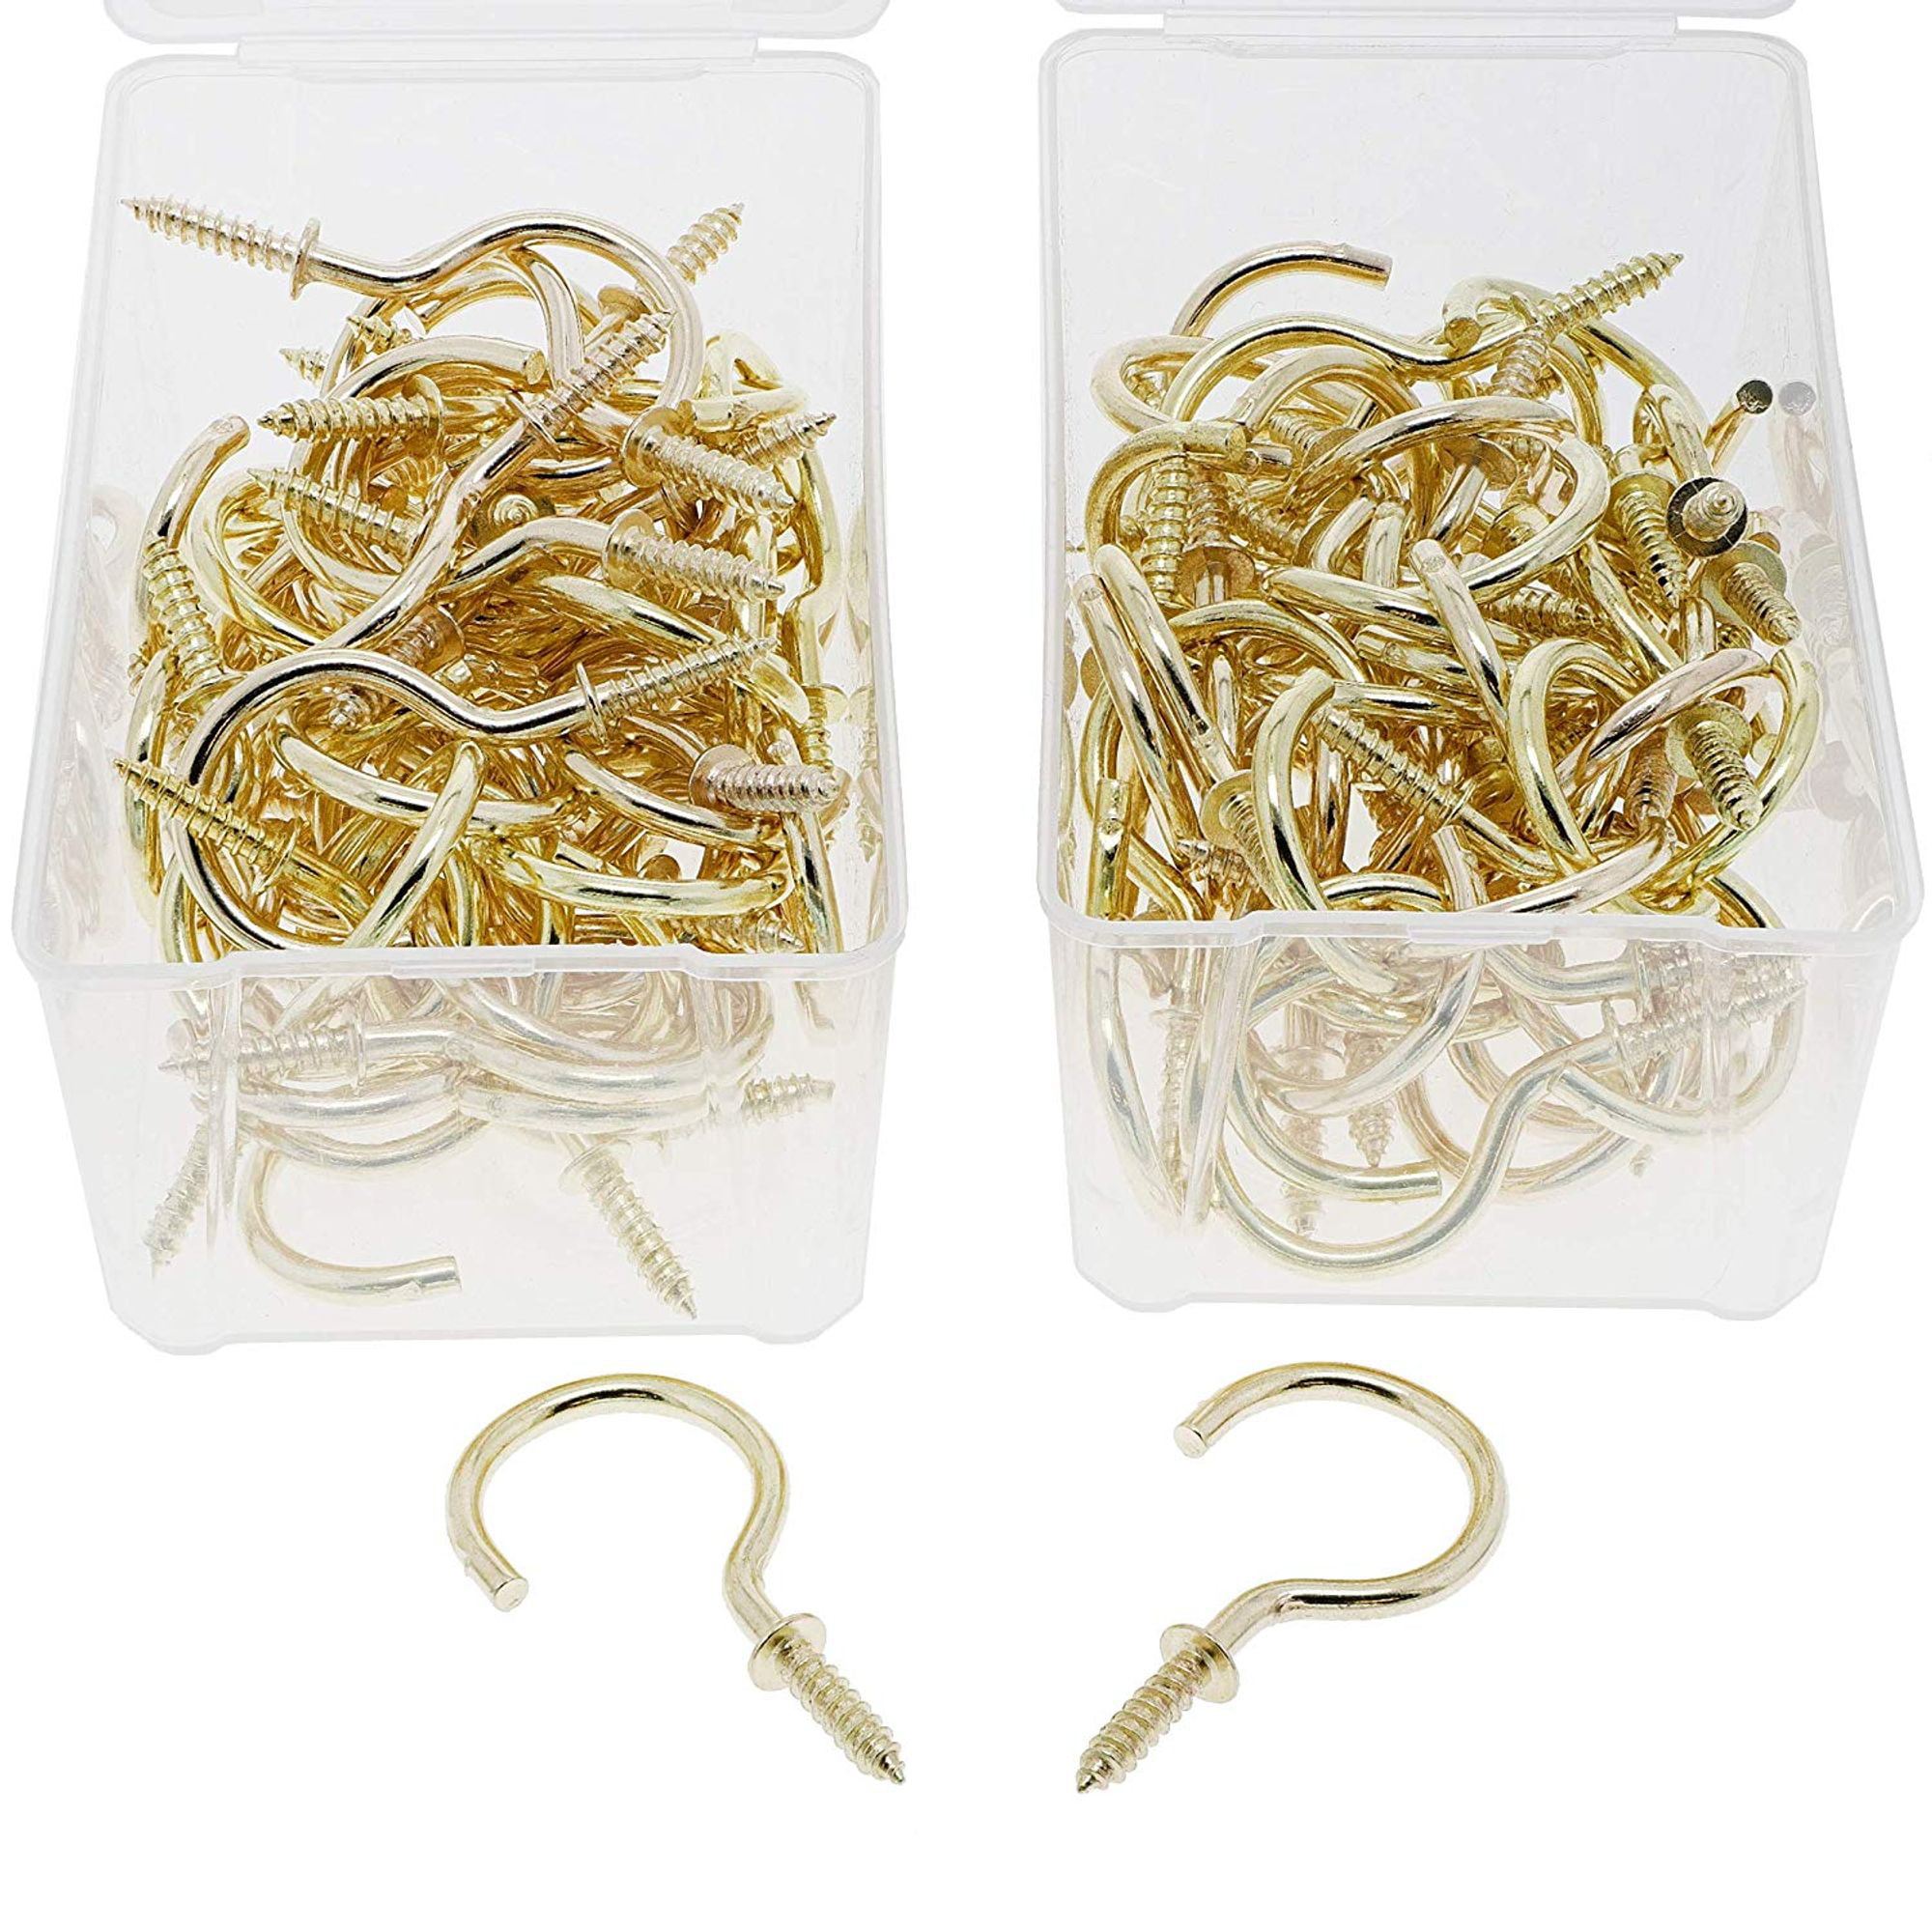 70Pcs 6 Sizes Cup Hooks Kit Screw Hooks Holder for Home Office Indoor Outdoor Mugs Wind Chimes Vinyl Coated Screw-in Ceiling Hooks Hangers for Hanging Plants 